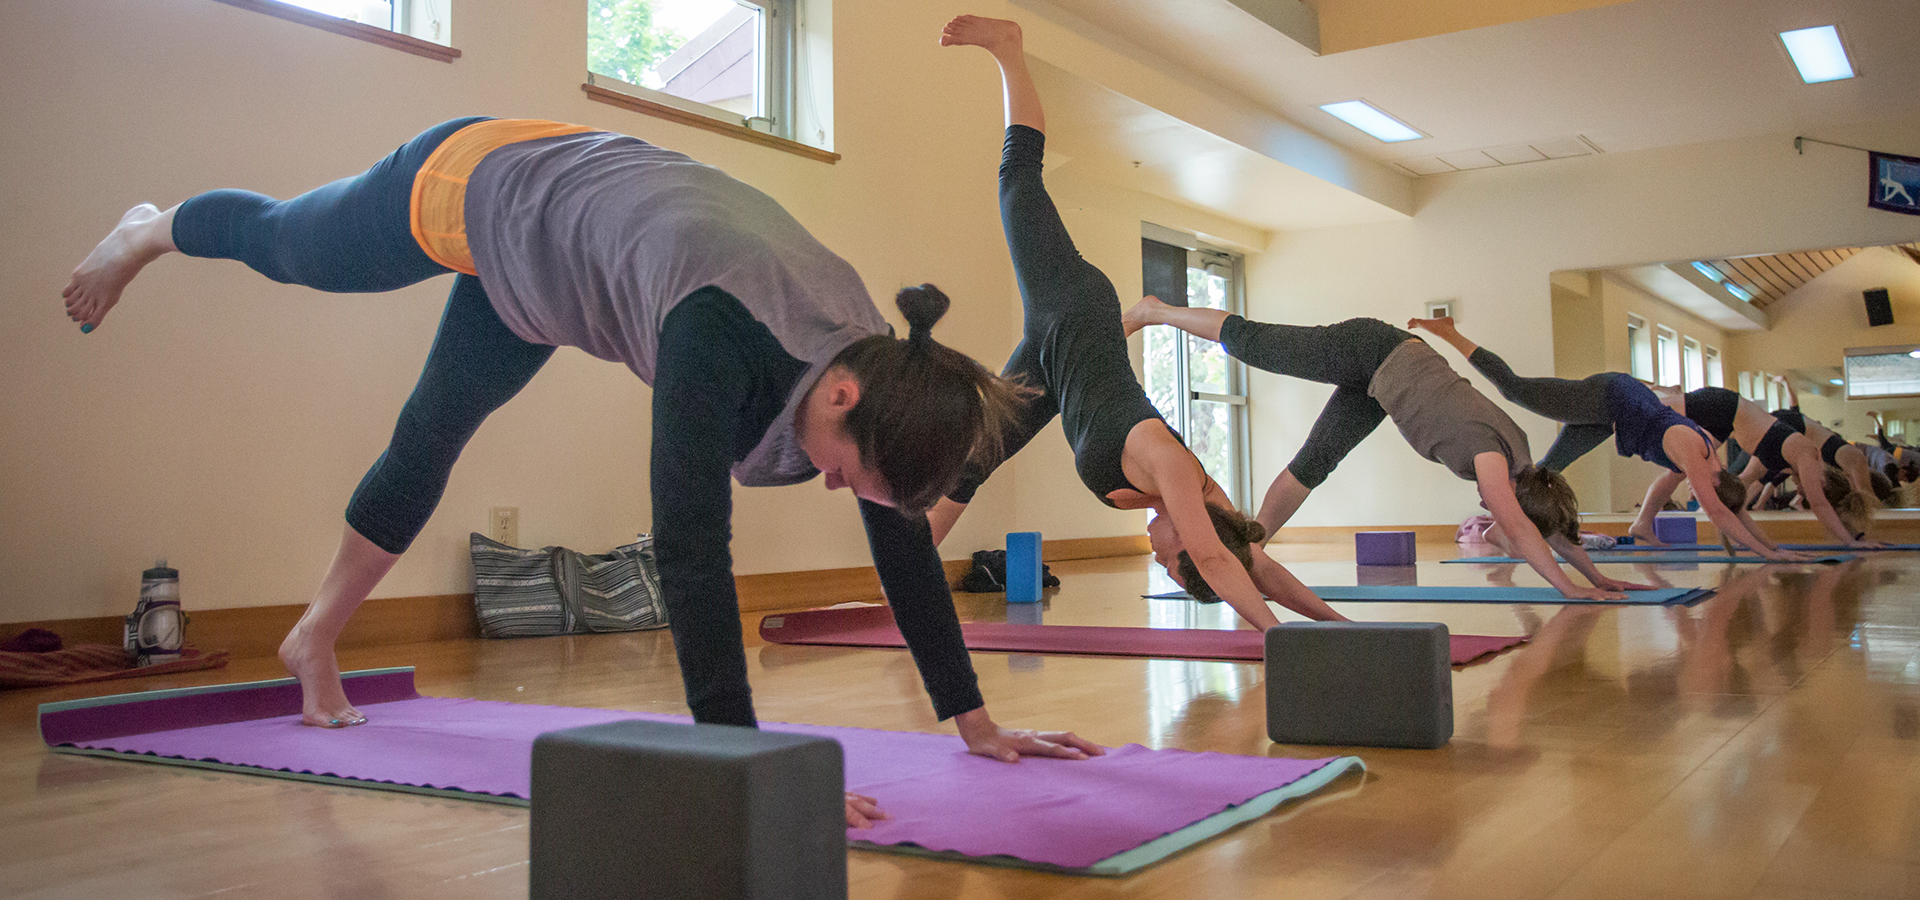 Movement Vitality - Traditional Yoga Meets Exercise Science